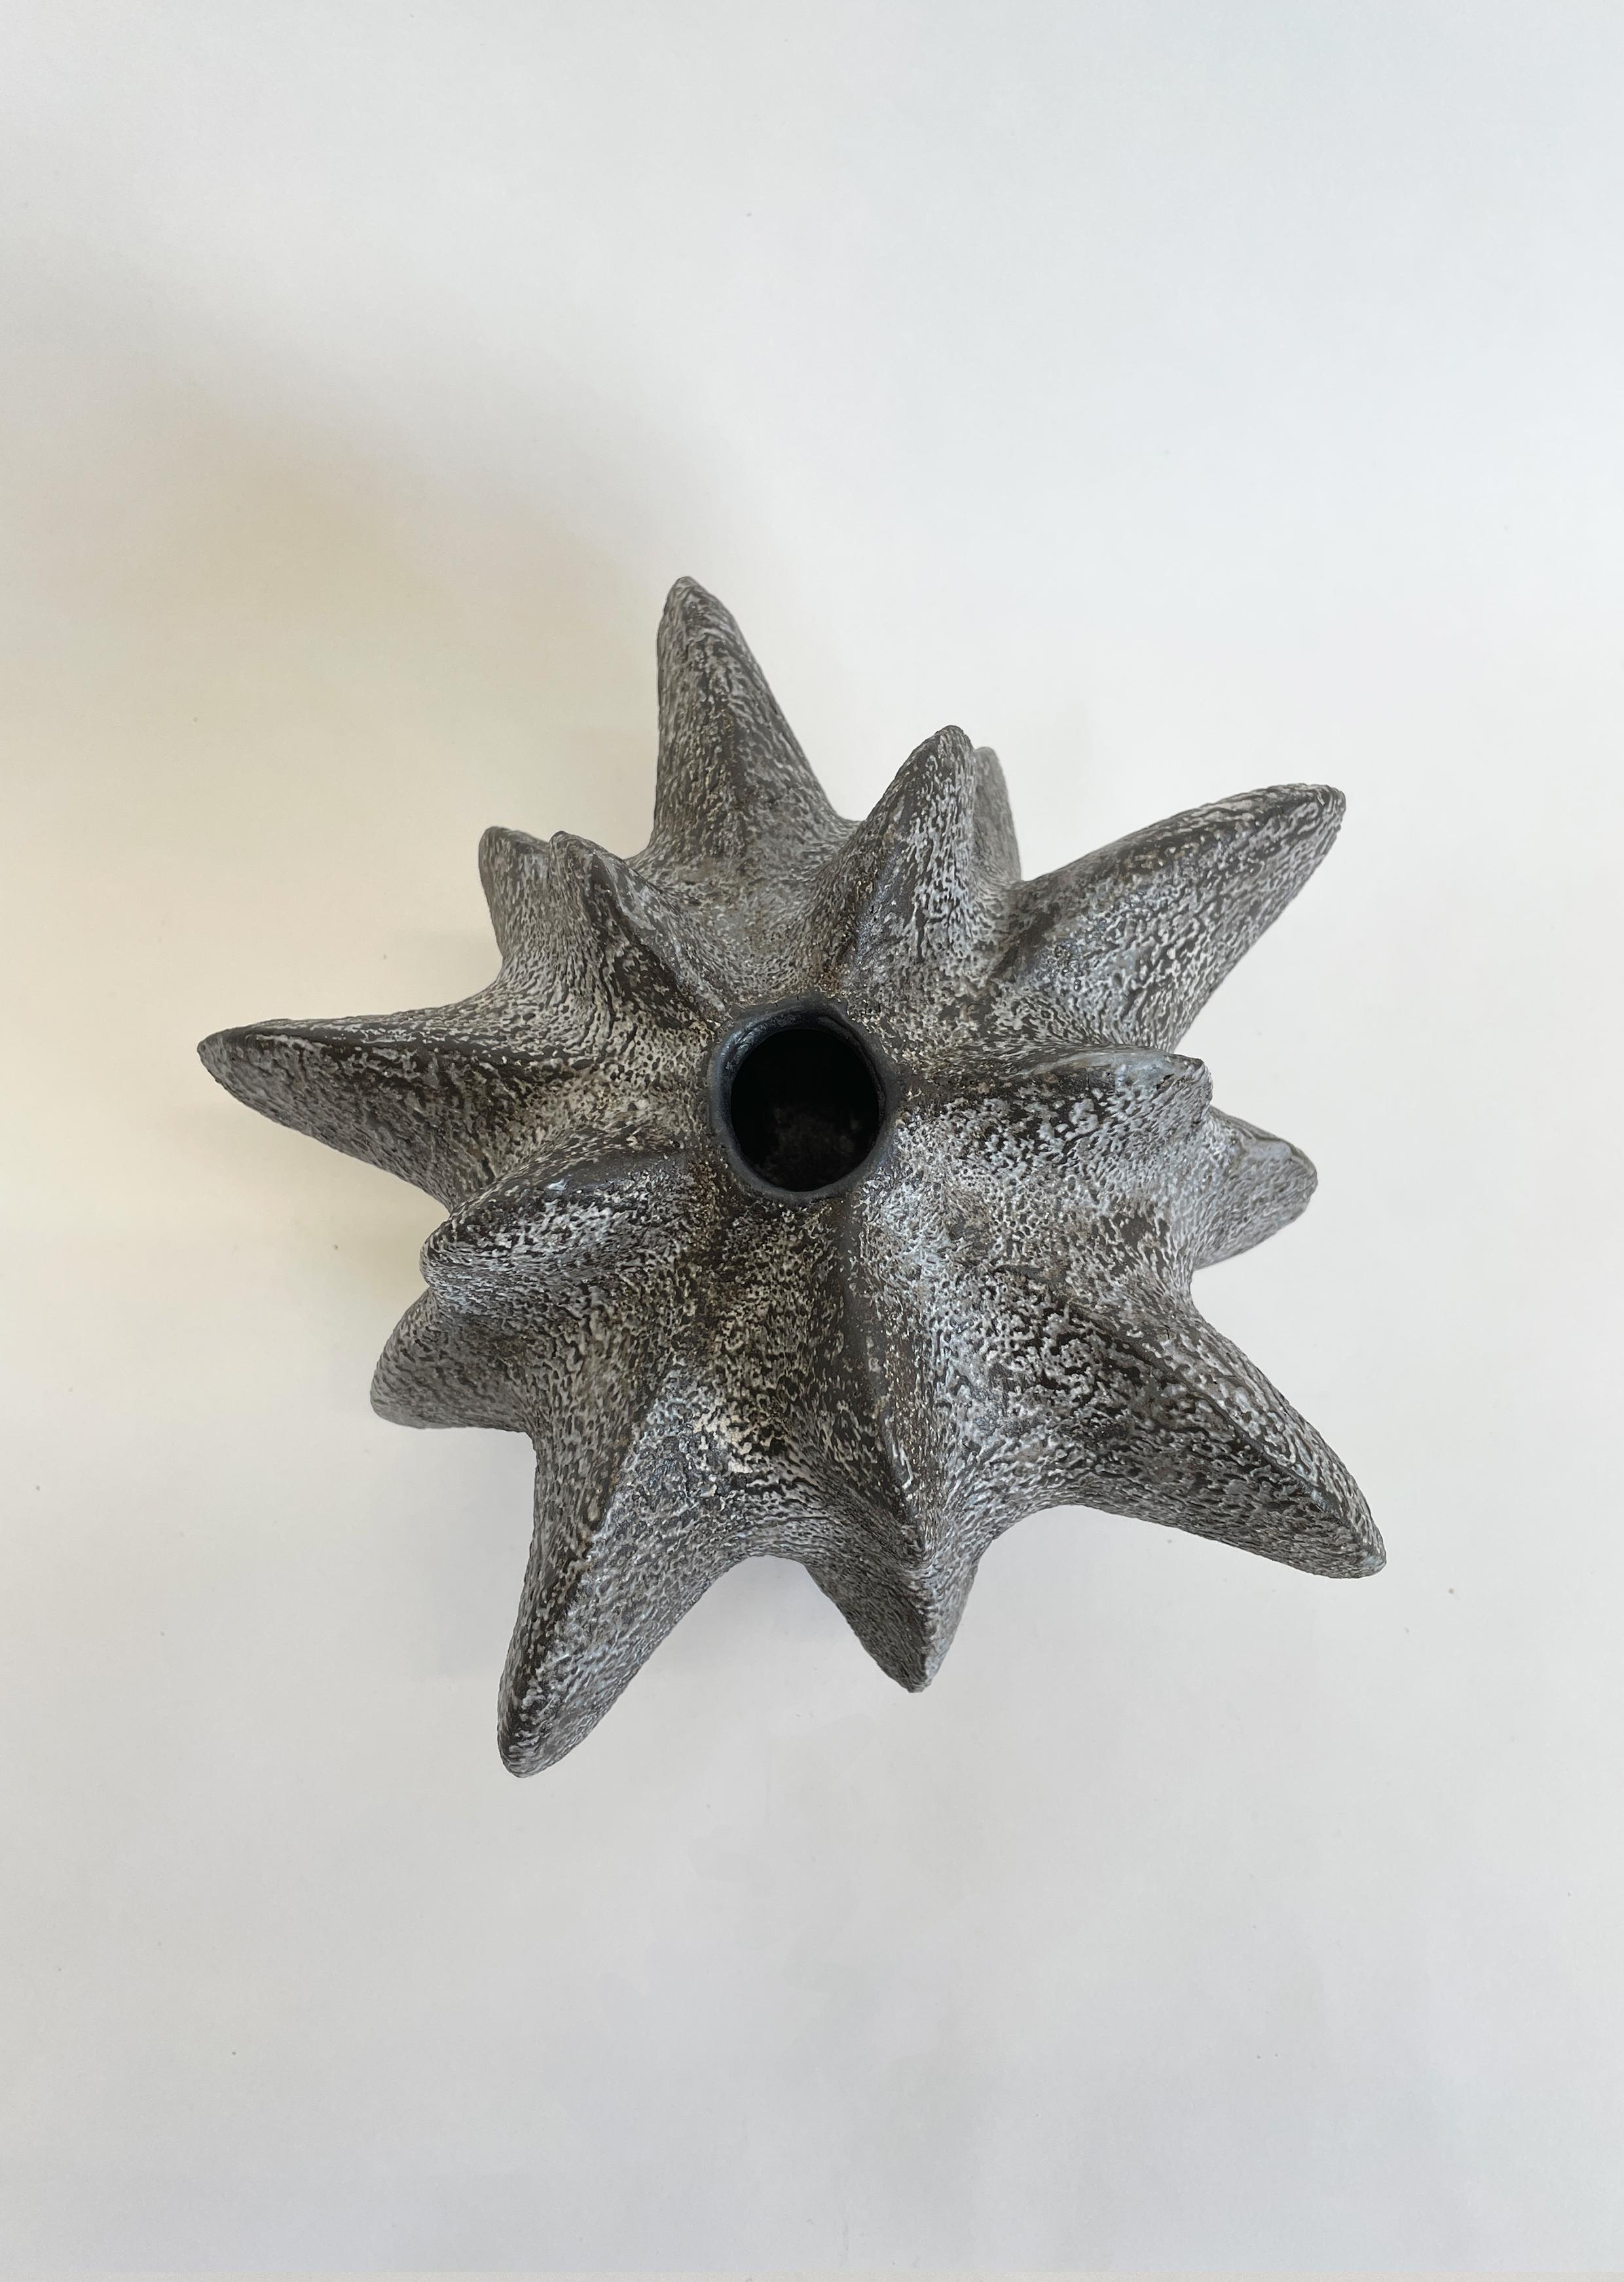 Charcoal Petal Gourd I by Julie Nelson
-One Of A Kind-
Dimensions: D 28 x H 22 cm
Materials: Ceramic stoneware and porcelain.

Artist Julie Nelson uses the materiality of clay as a means to explore naturally occurring patterns and repetitions.